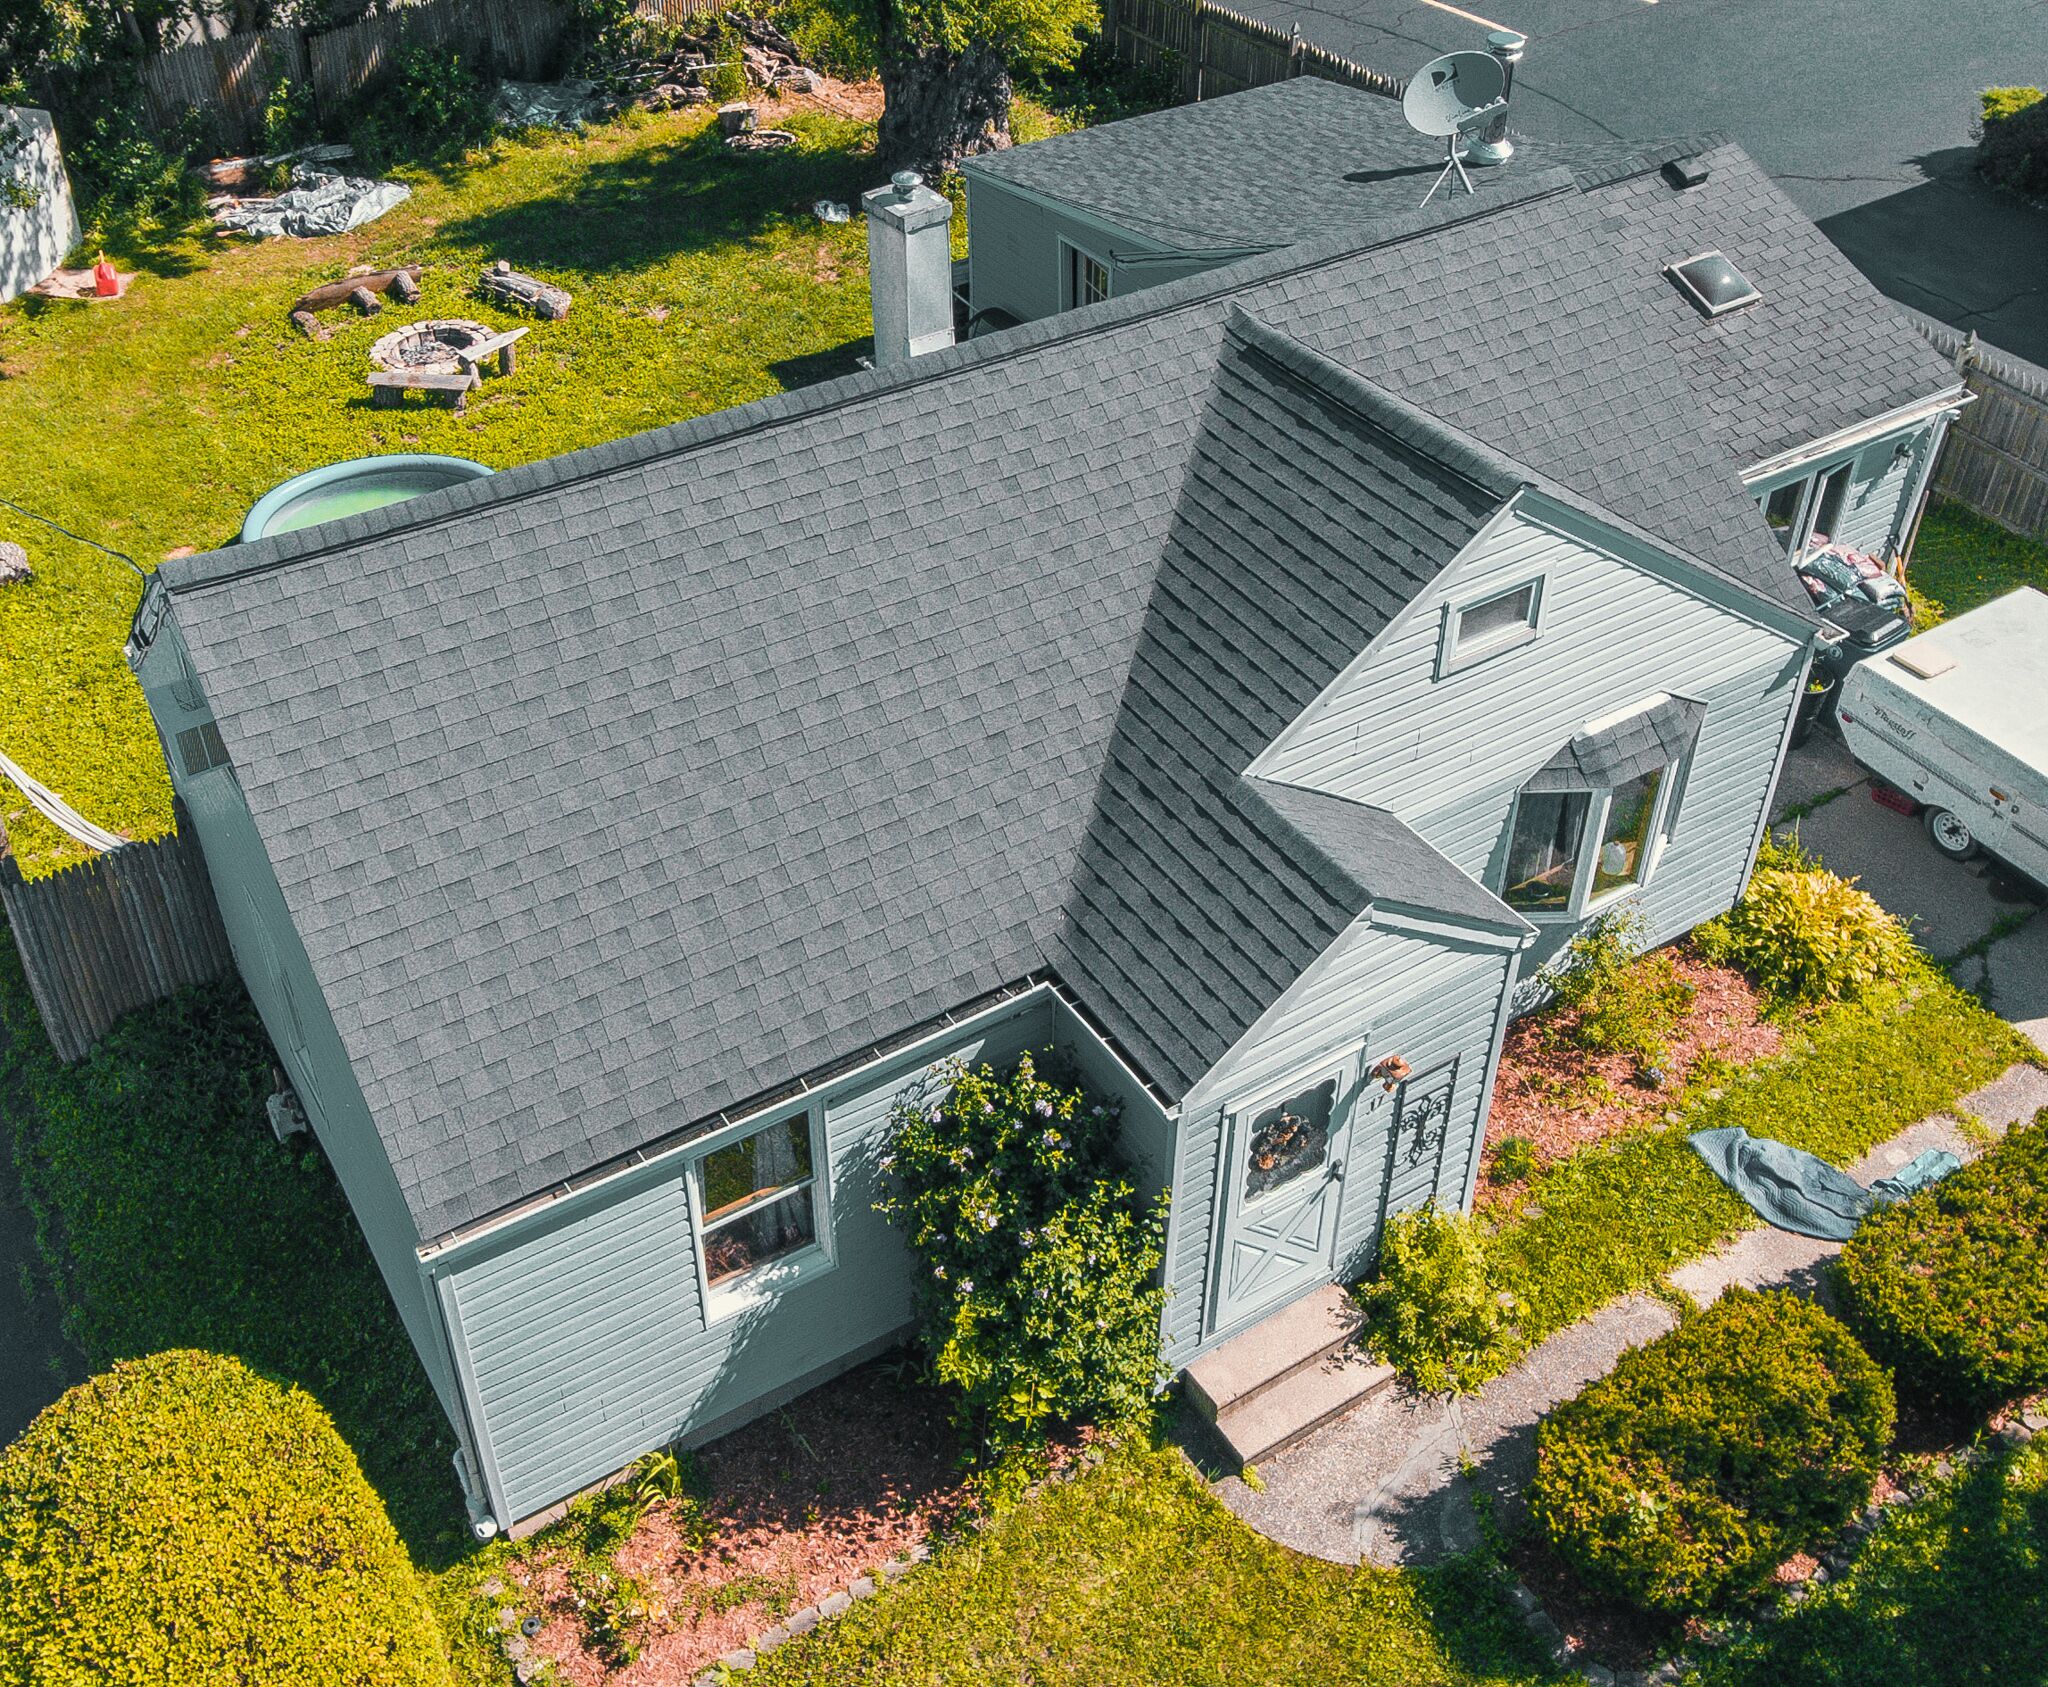 DRONE VIDEO OF GAF OYSTER GREY ROOF AND CERTAINTEED SIDING 